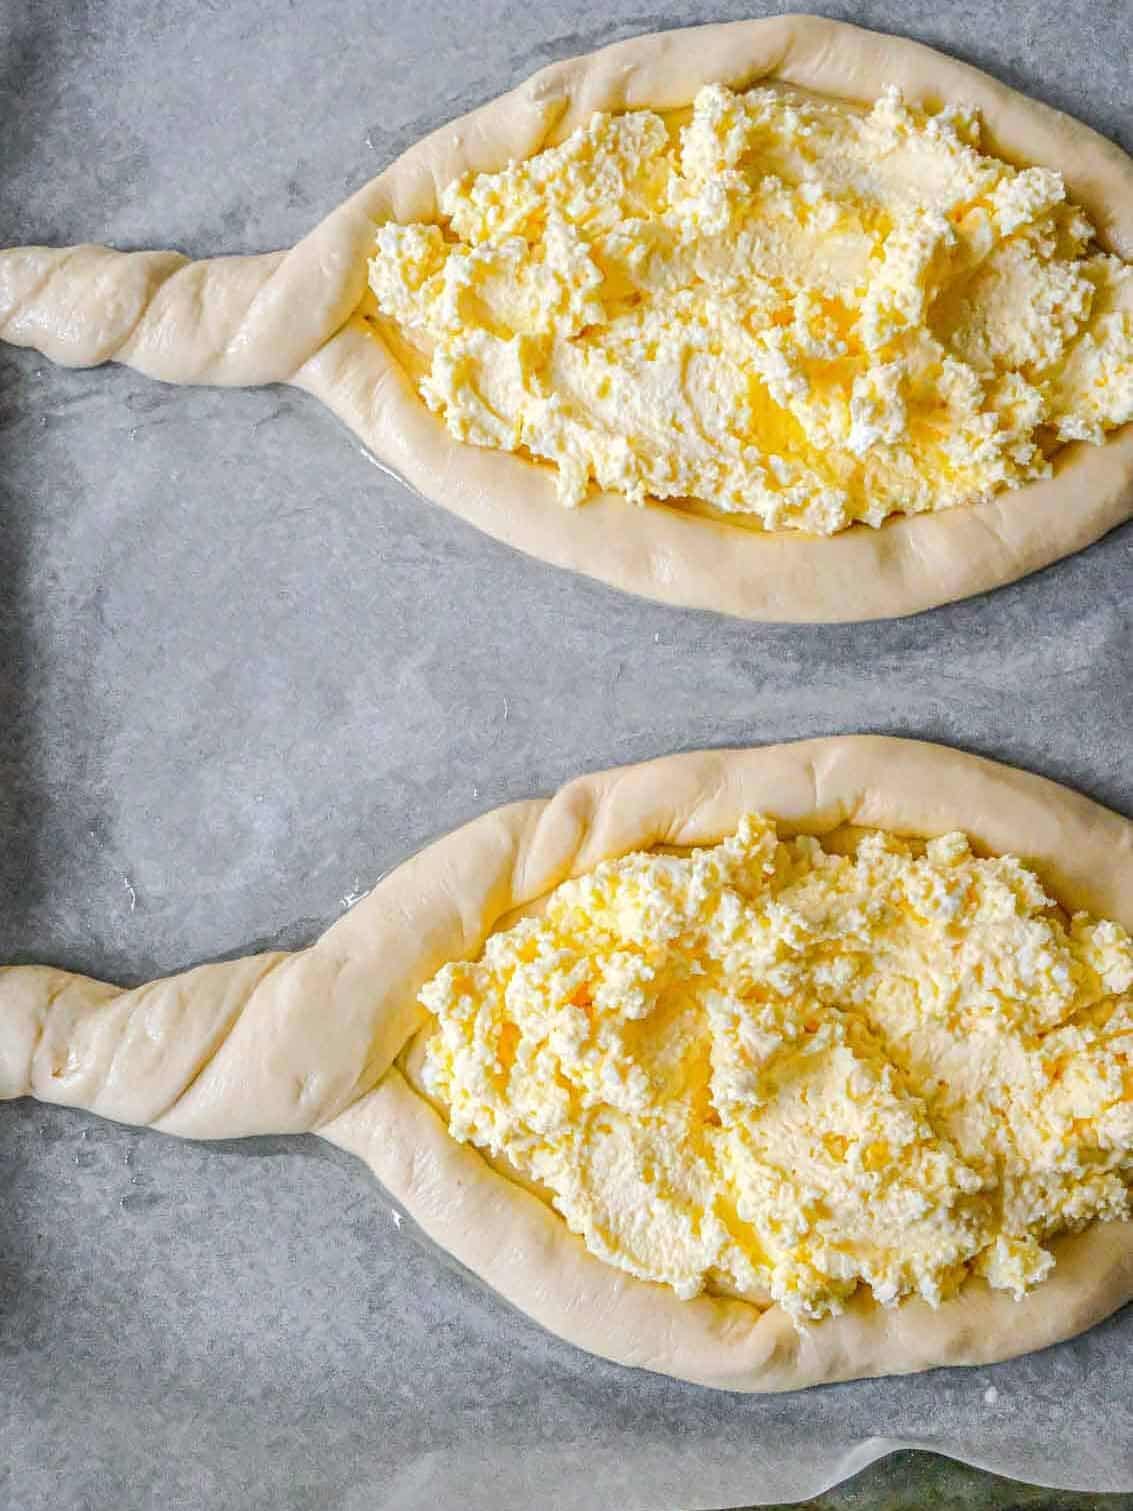 cheese filling inside uncooked dough khachapuri shapes